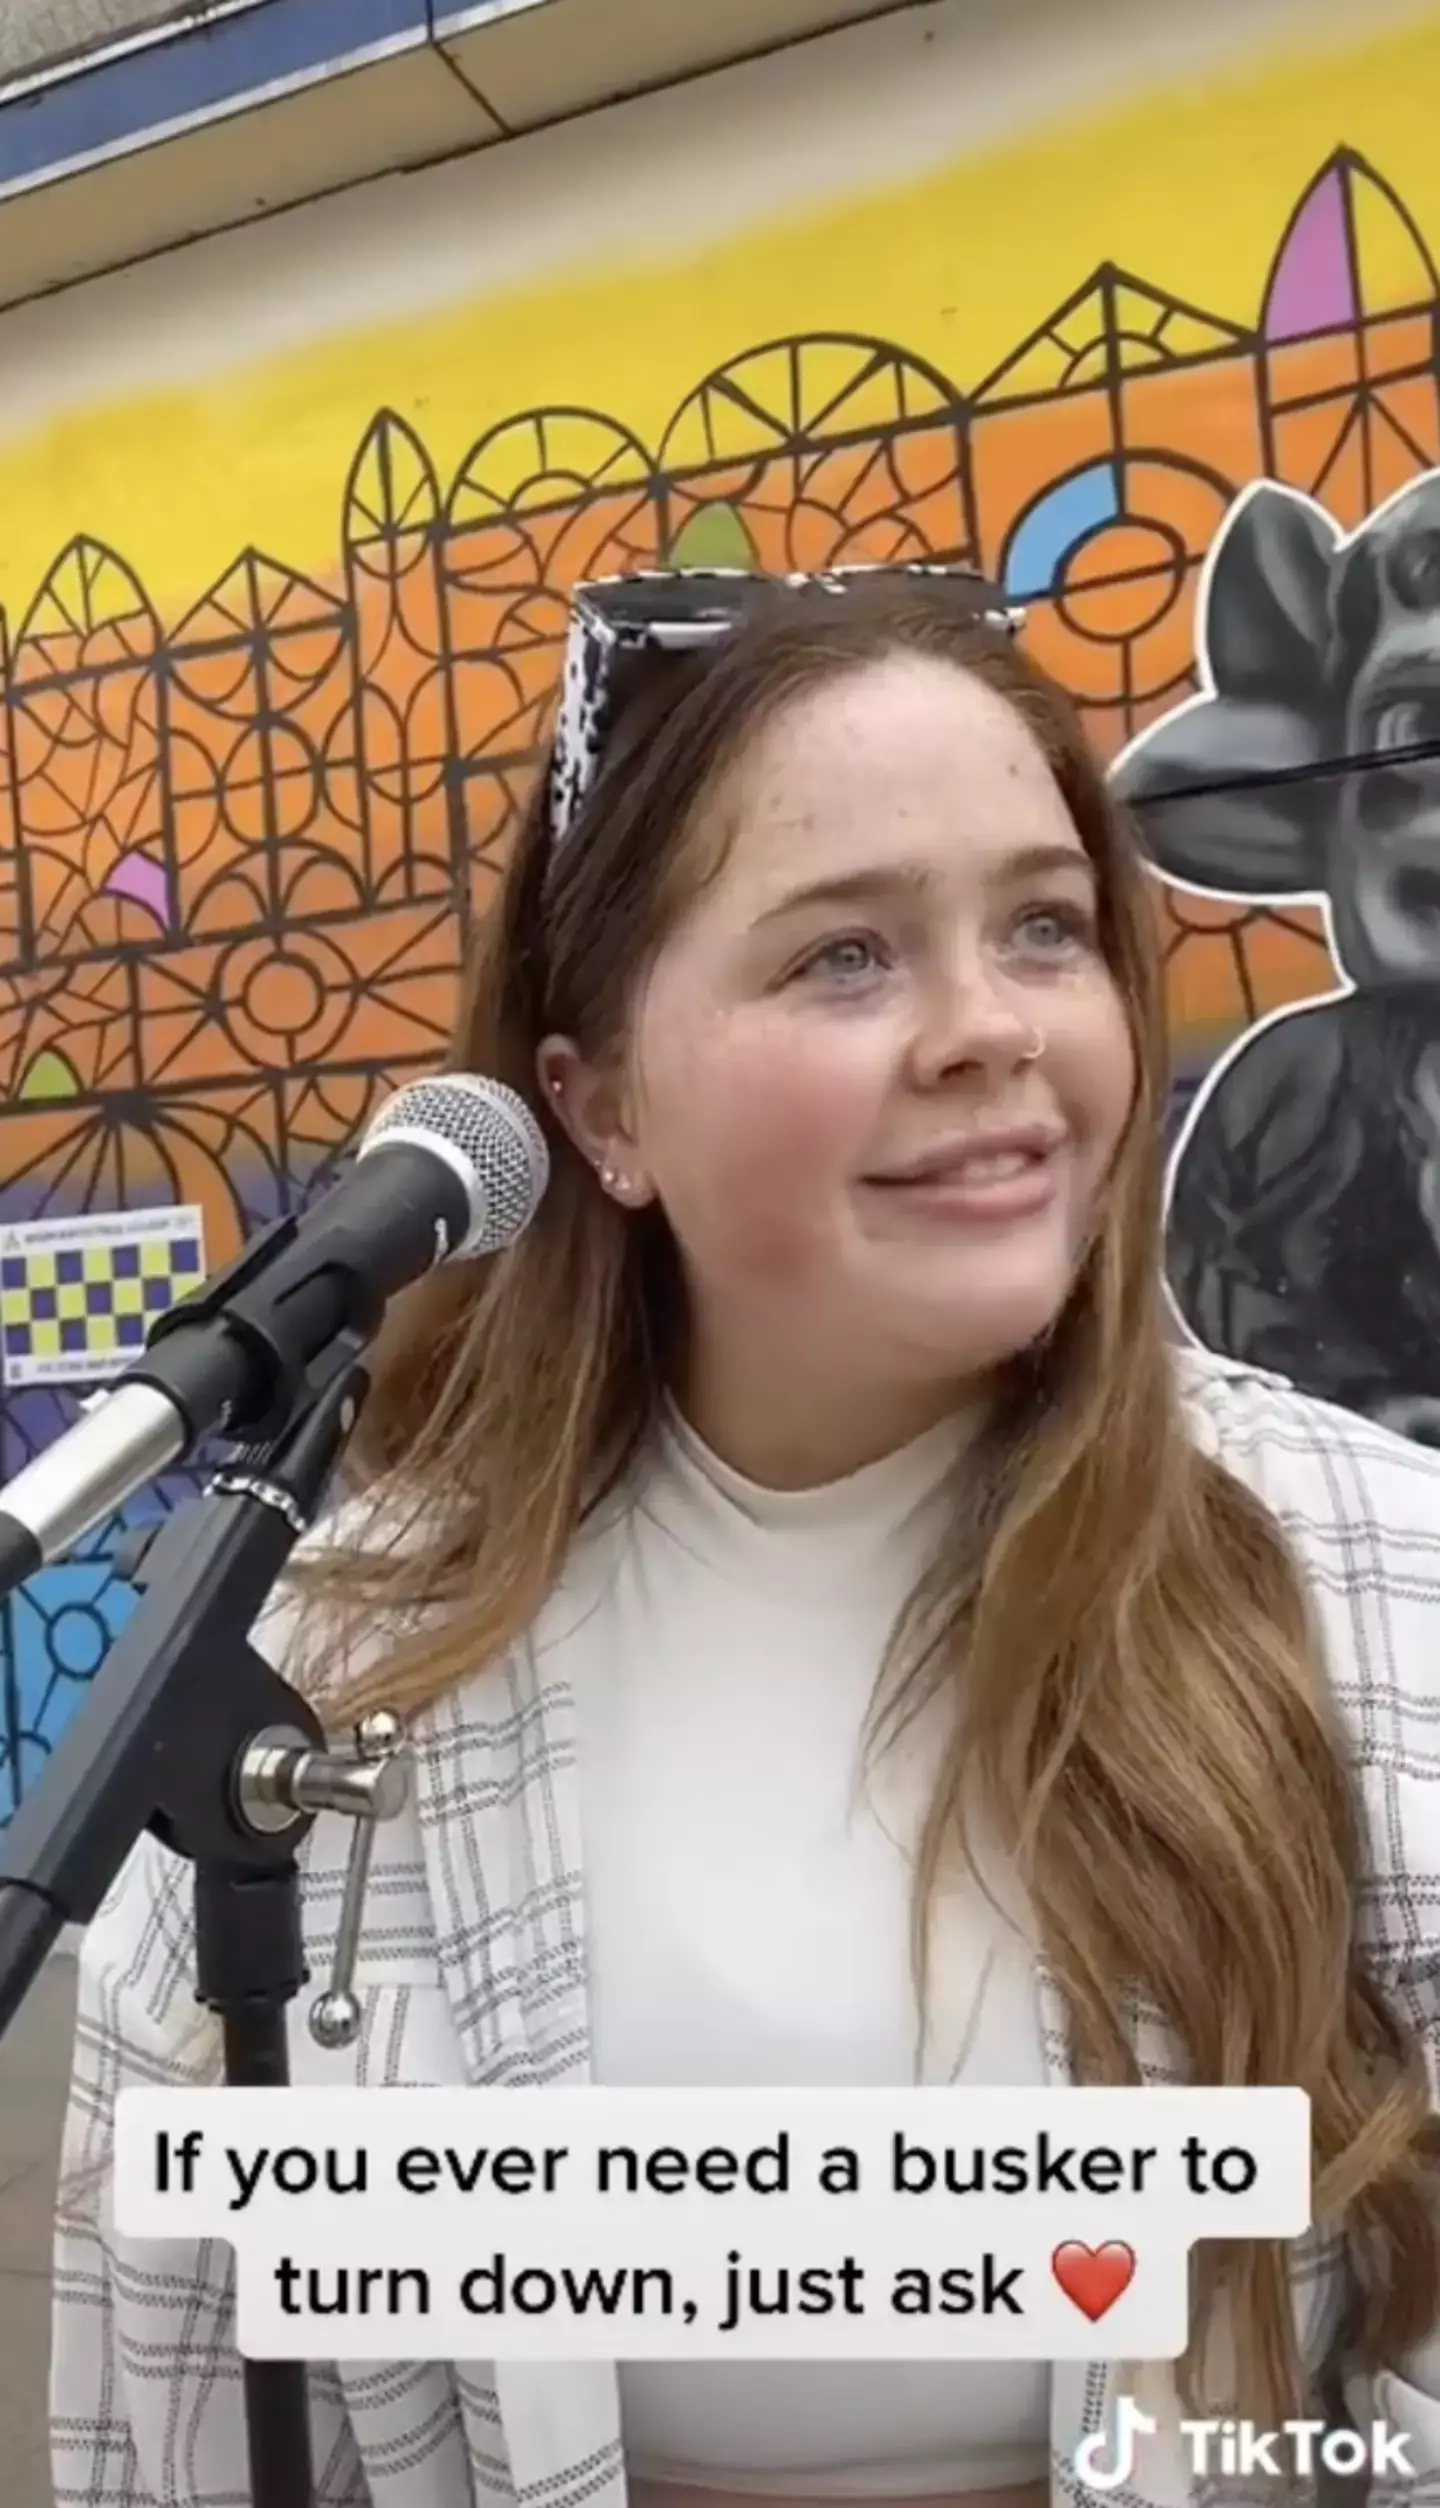 Back in April, busker Charli Mason was met with similar praise after she shared a busking video on TikTok.